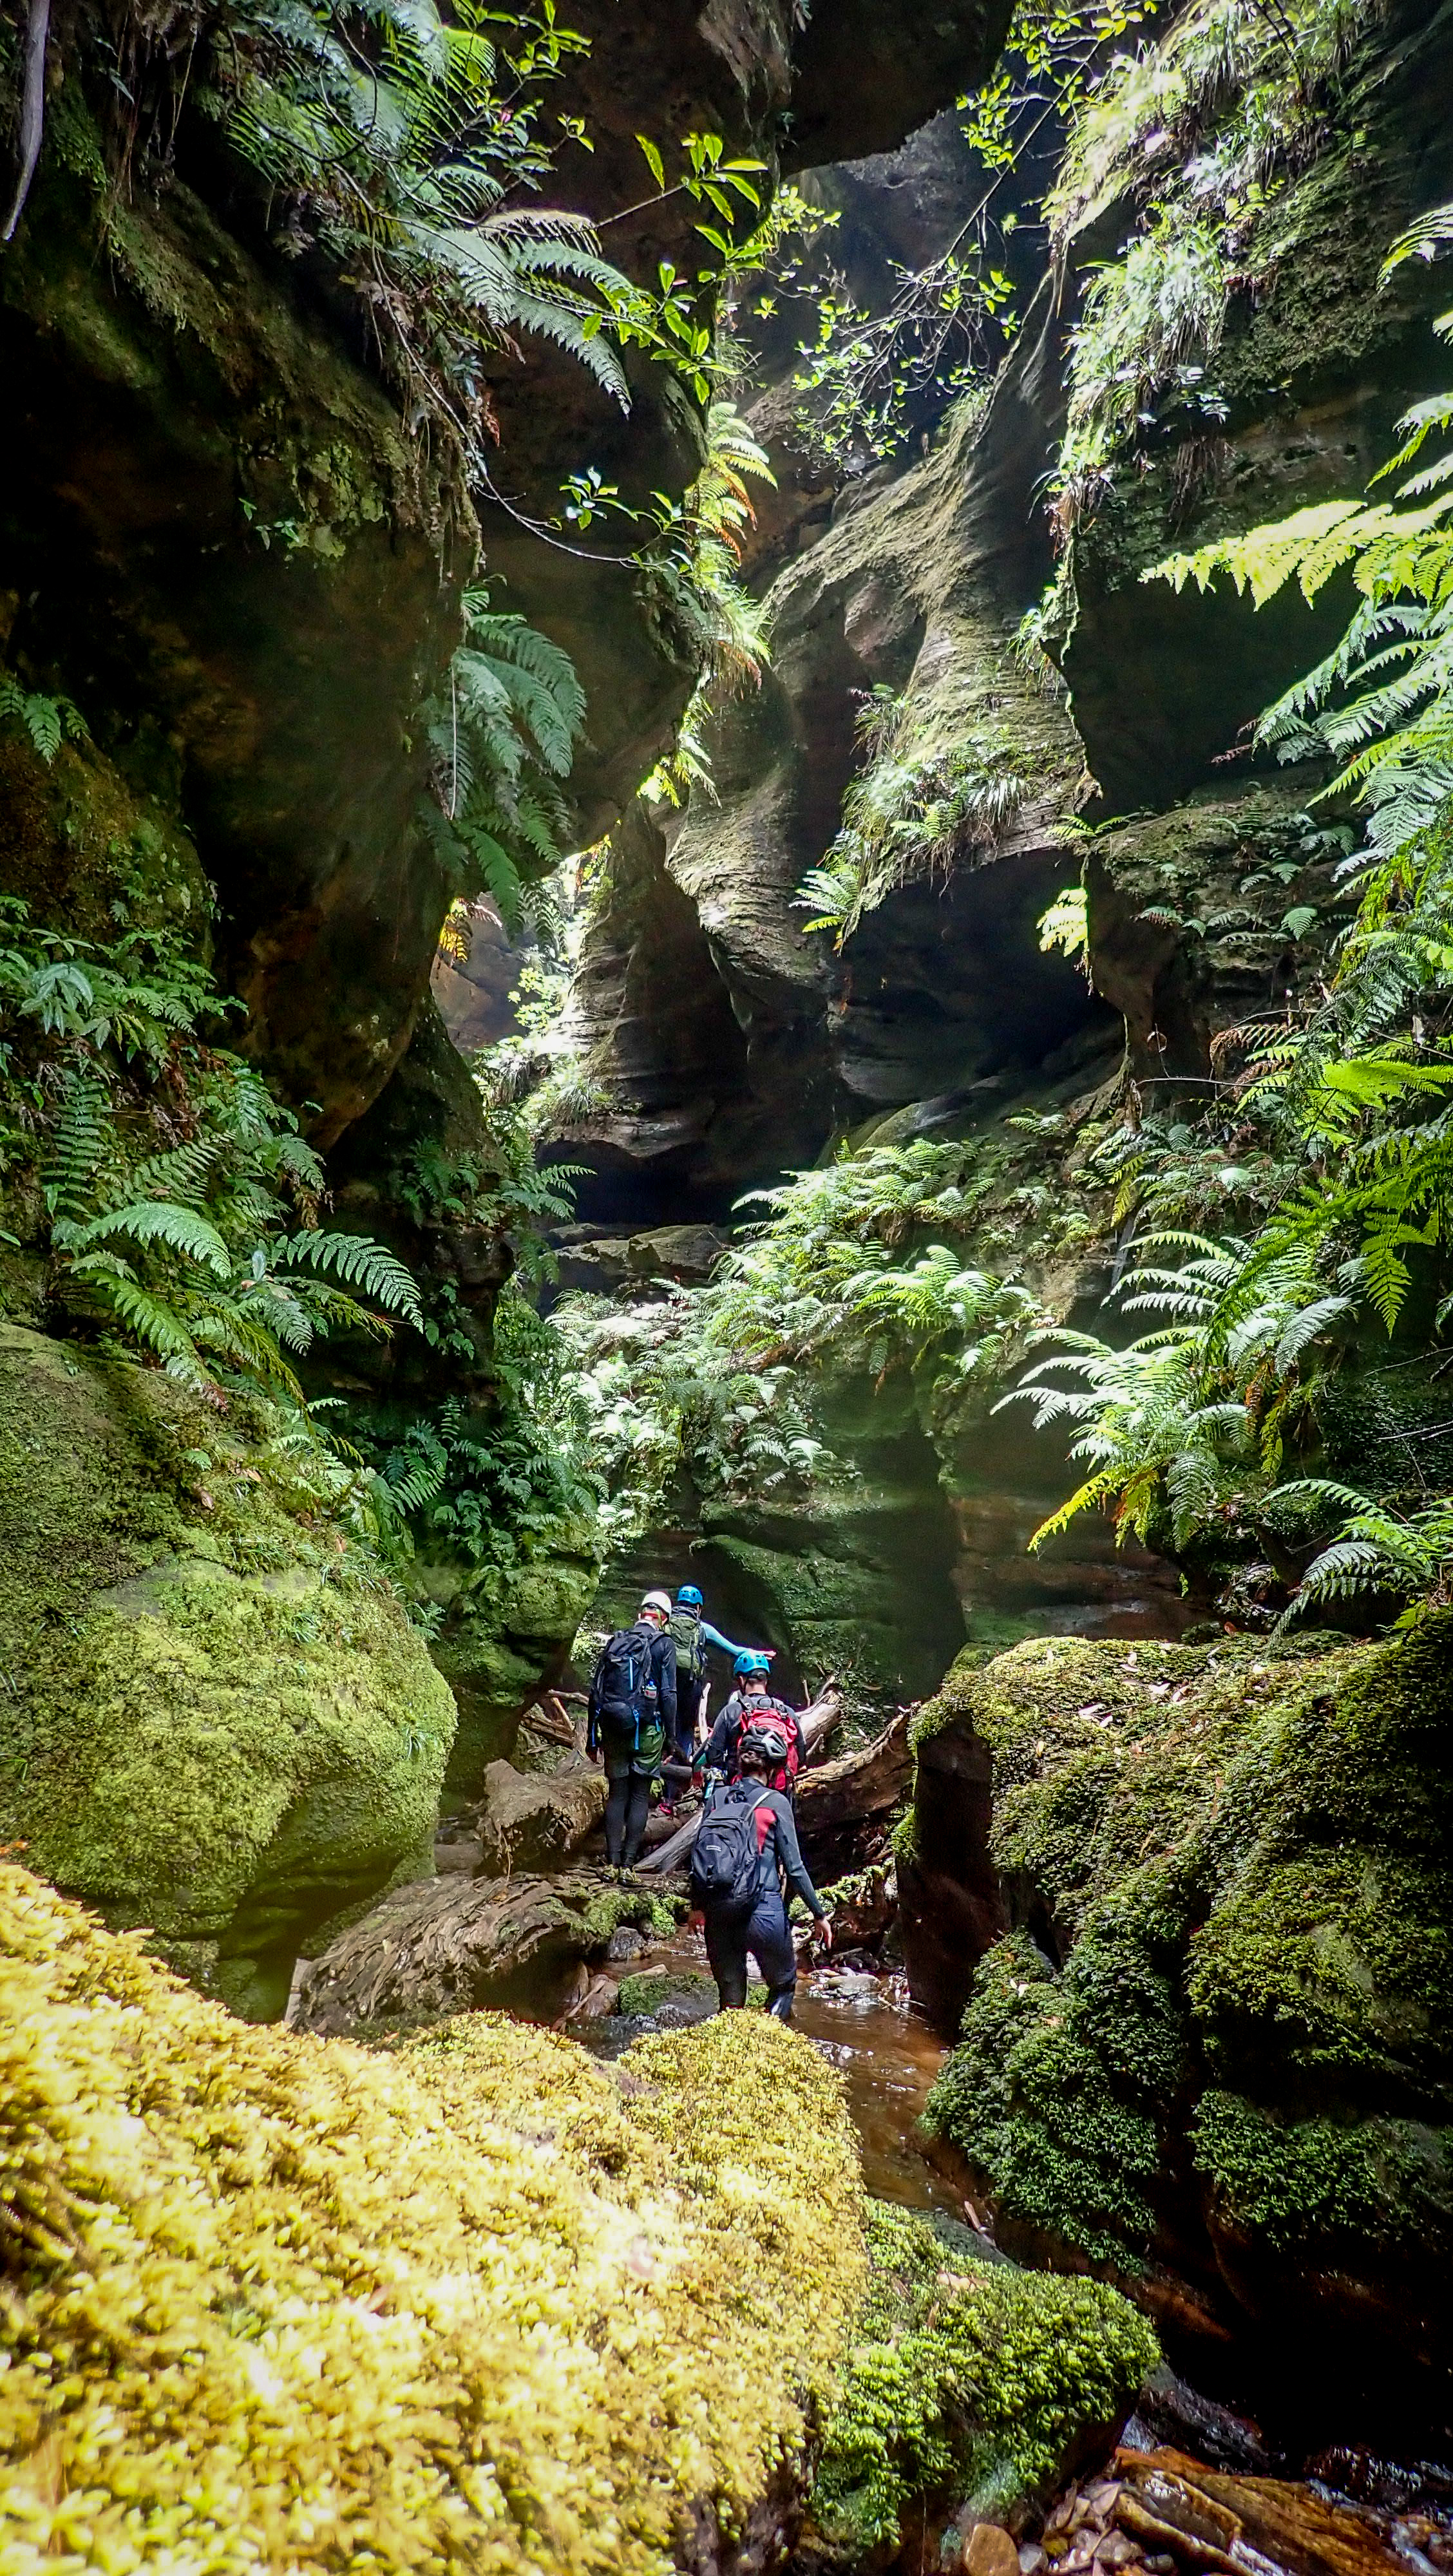 Group of people guided through upper Blue Mountains canyon. Photo: Caro Ryan